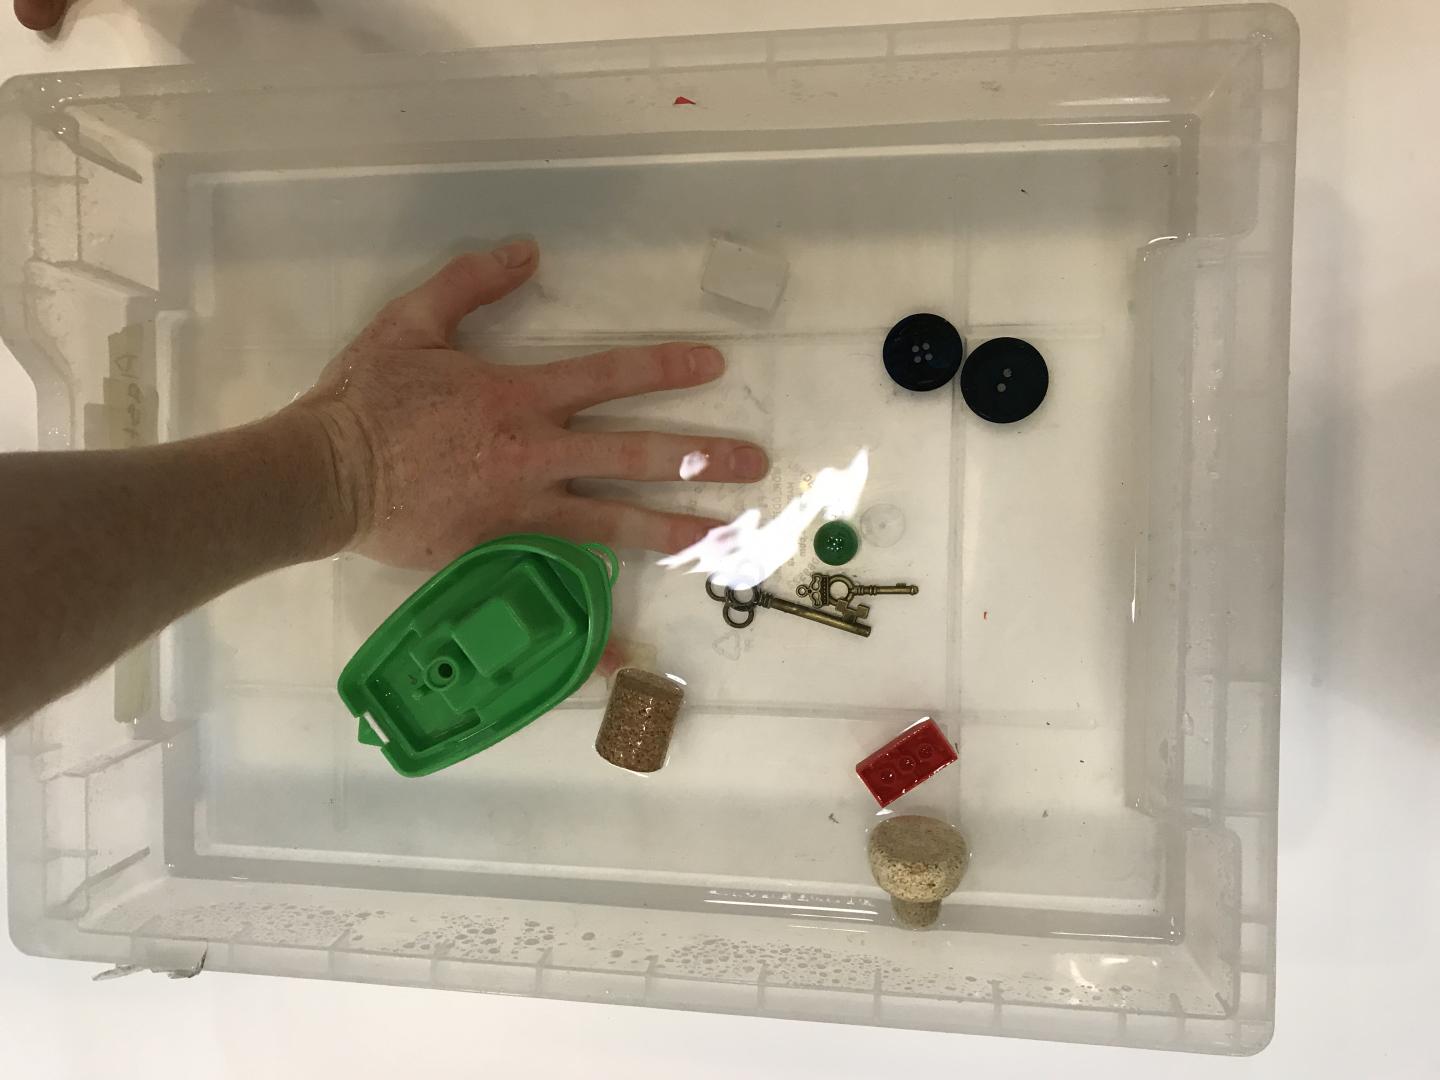 Someone is plunging their hand into a tray of water. Also in the water are a toy boat, some corks and keys, and other miscellaneous objects. 